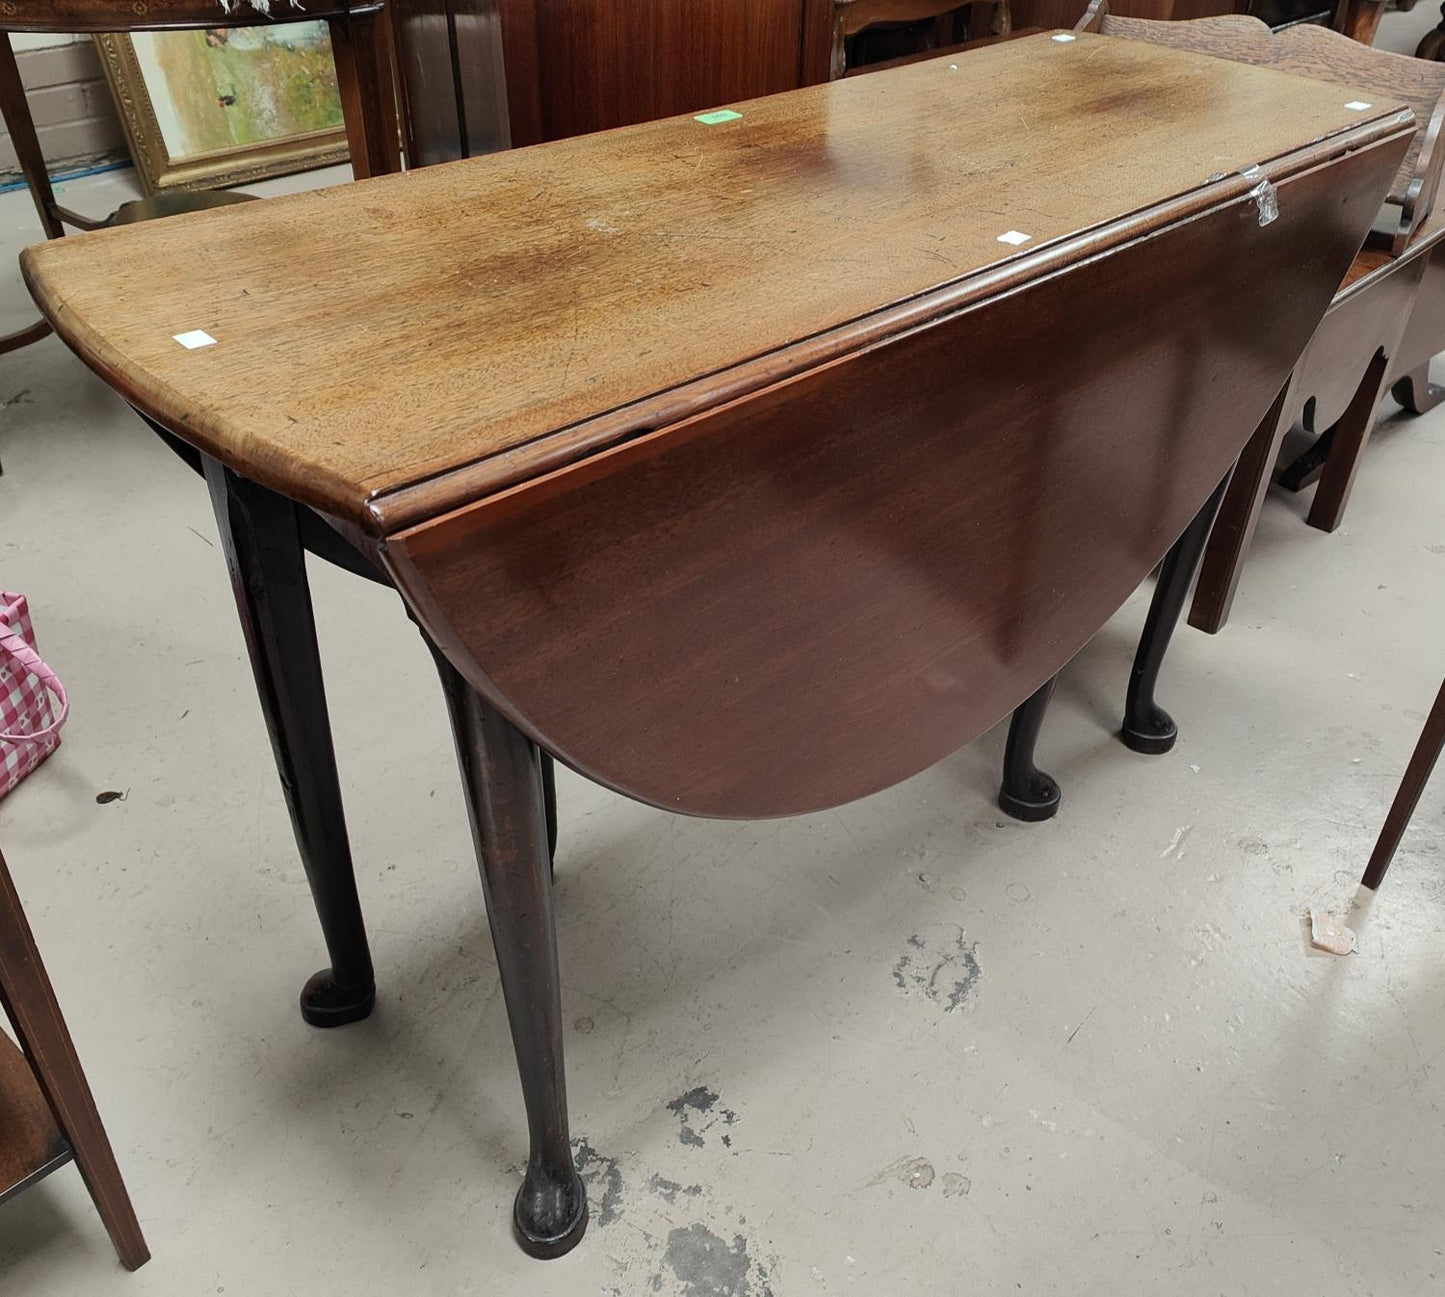 A mid 18th century mahogany dining table with oval drop leaf top